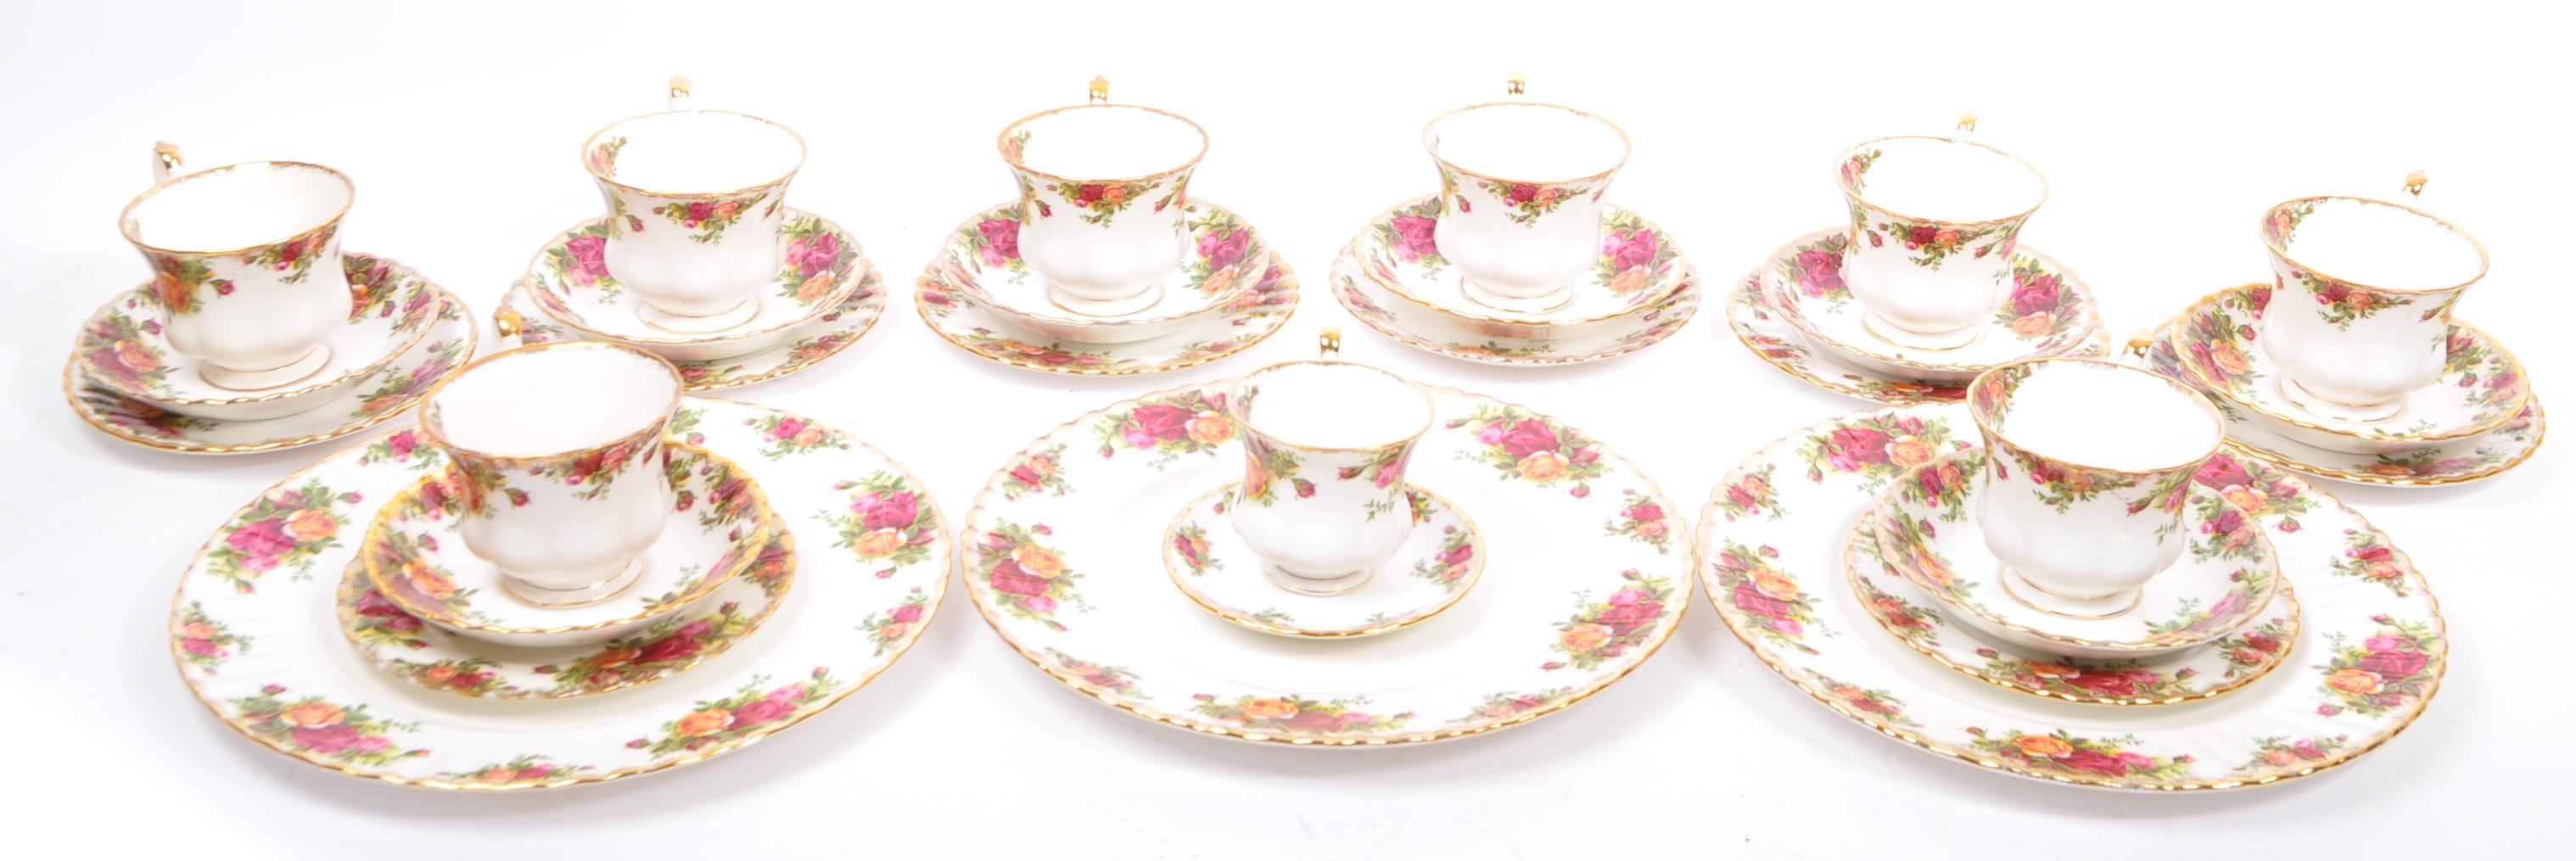 ROYAL ALBERT OLD COUNTRY ROSES CHINA TEA & DINNER SERVICE - Image 5 of 8